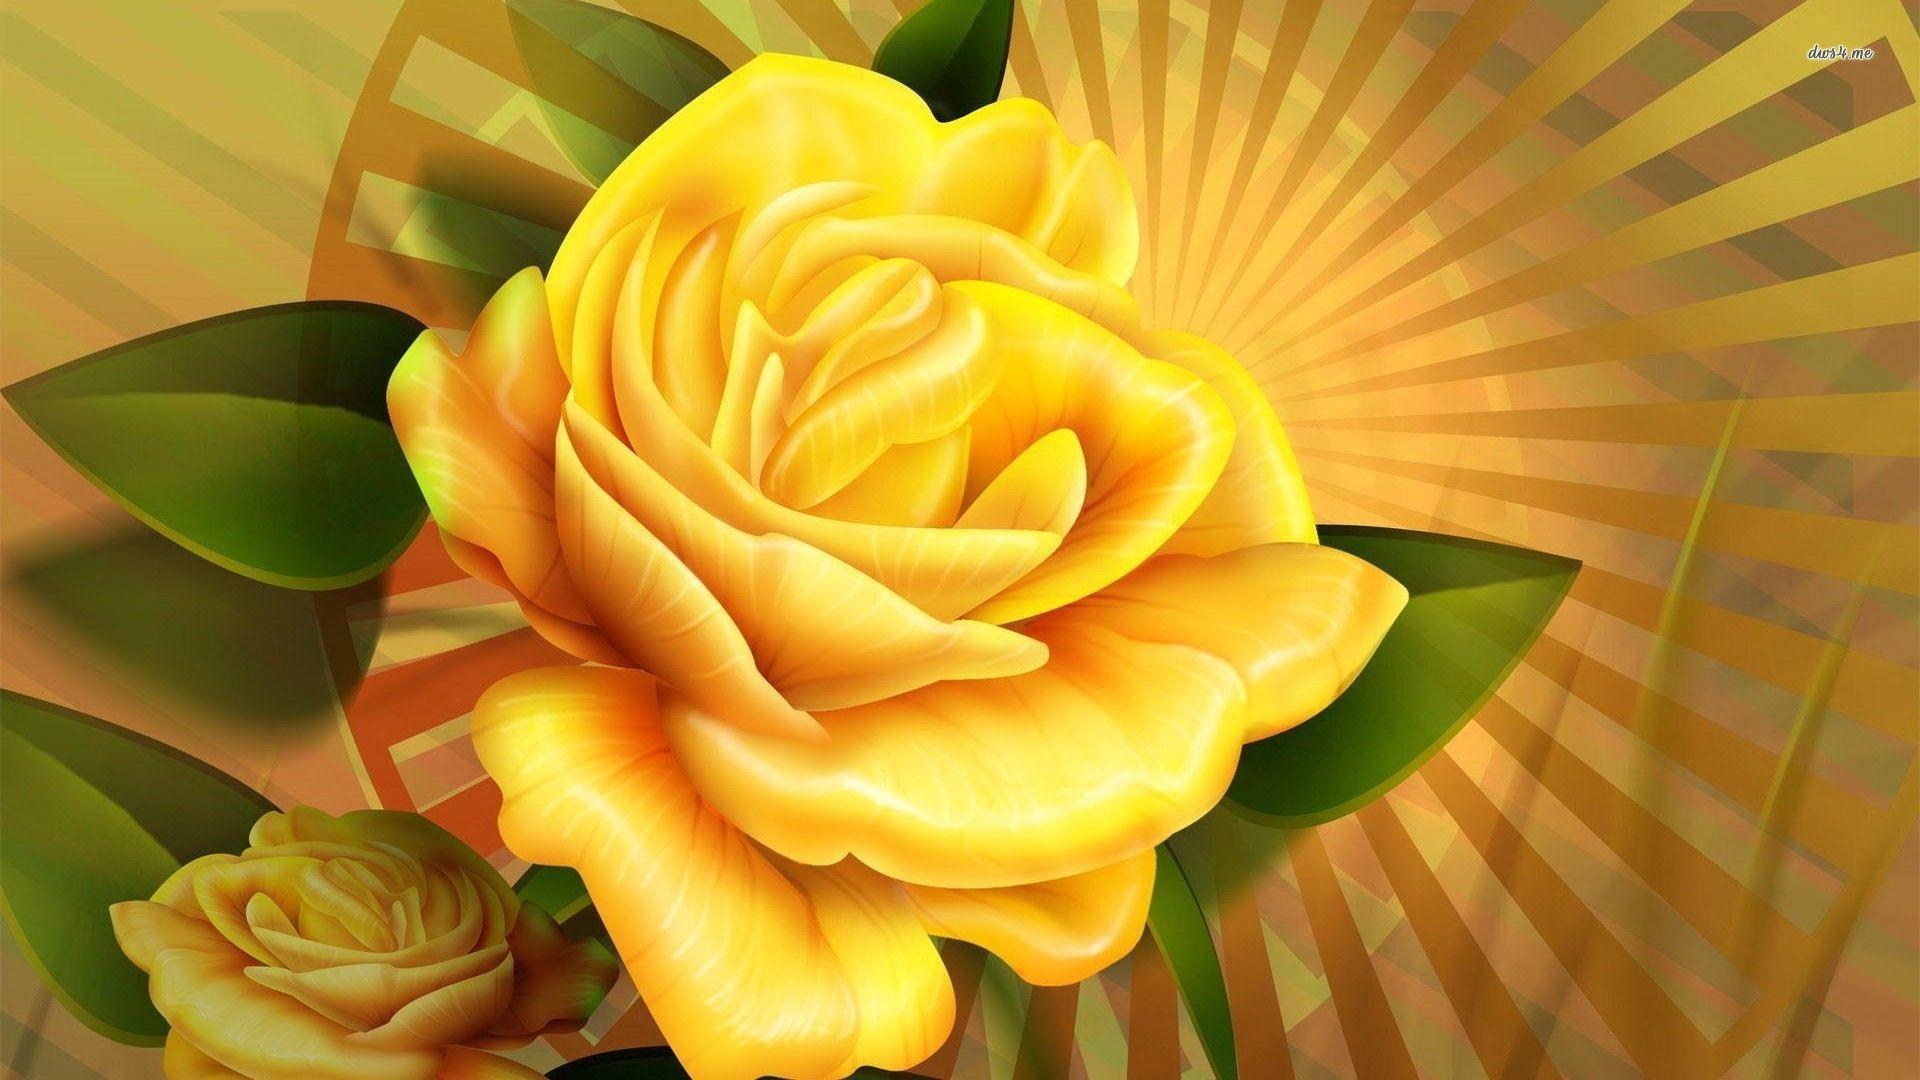 Wallpaper For > Bunch Of Yellow Roses Wallpaper